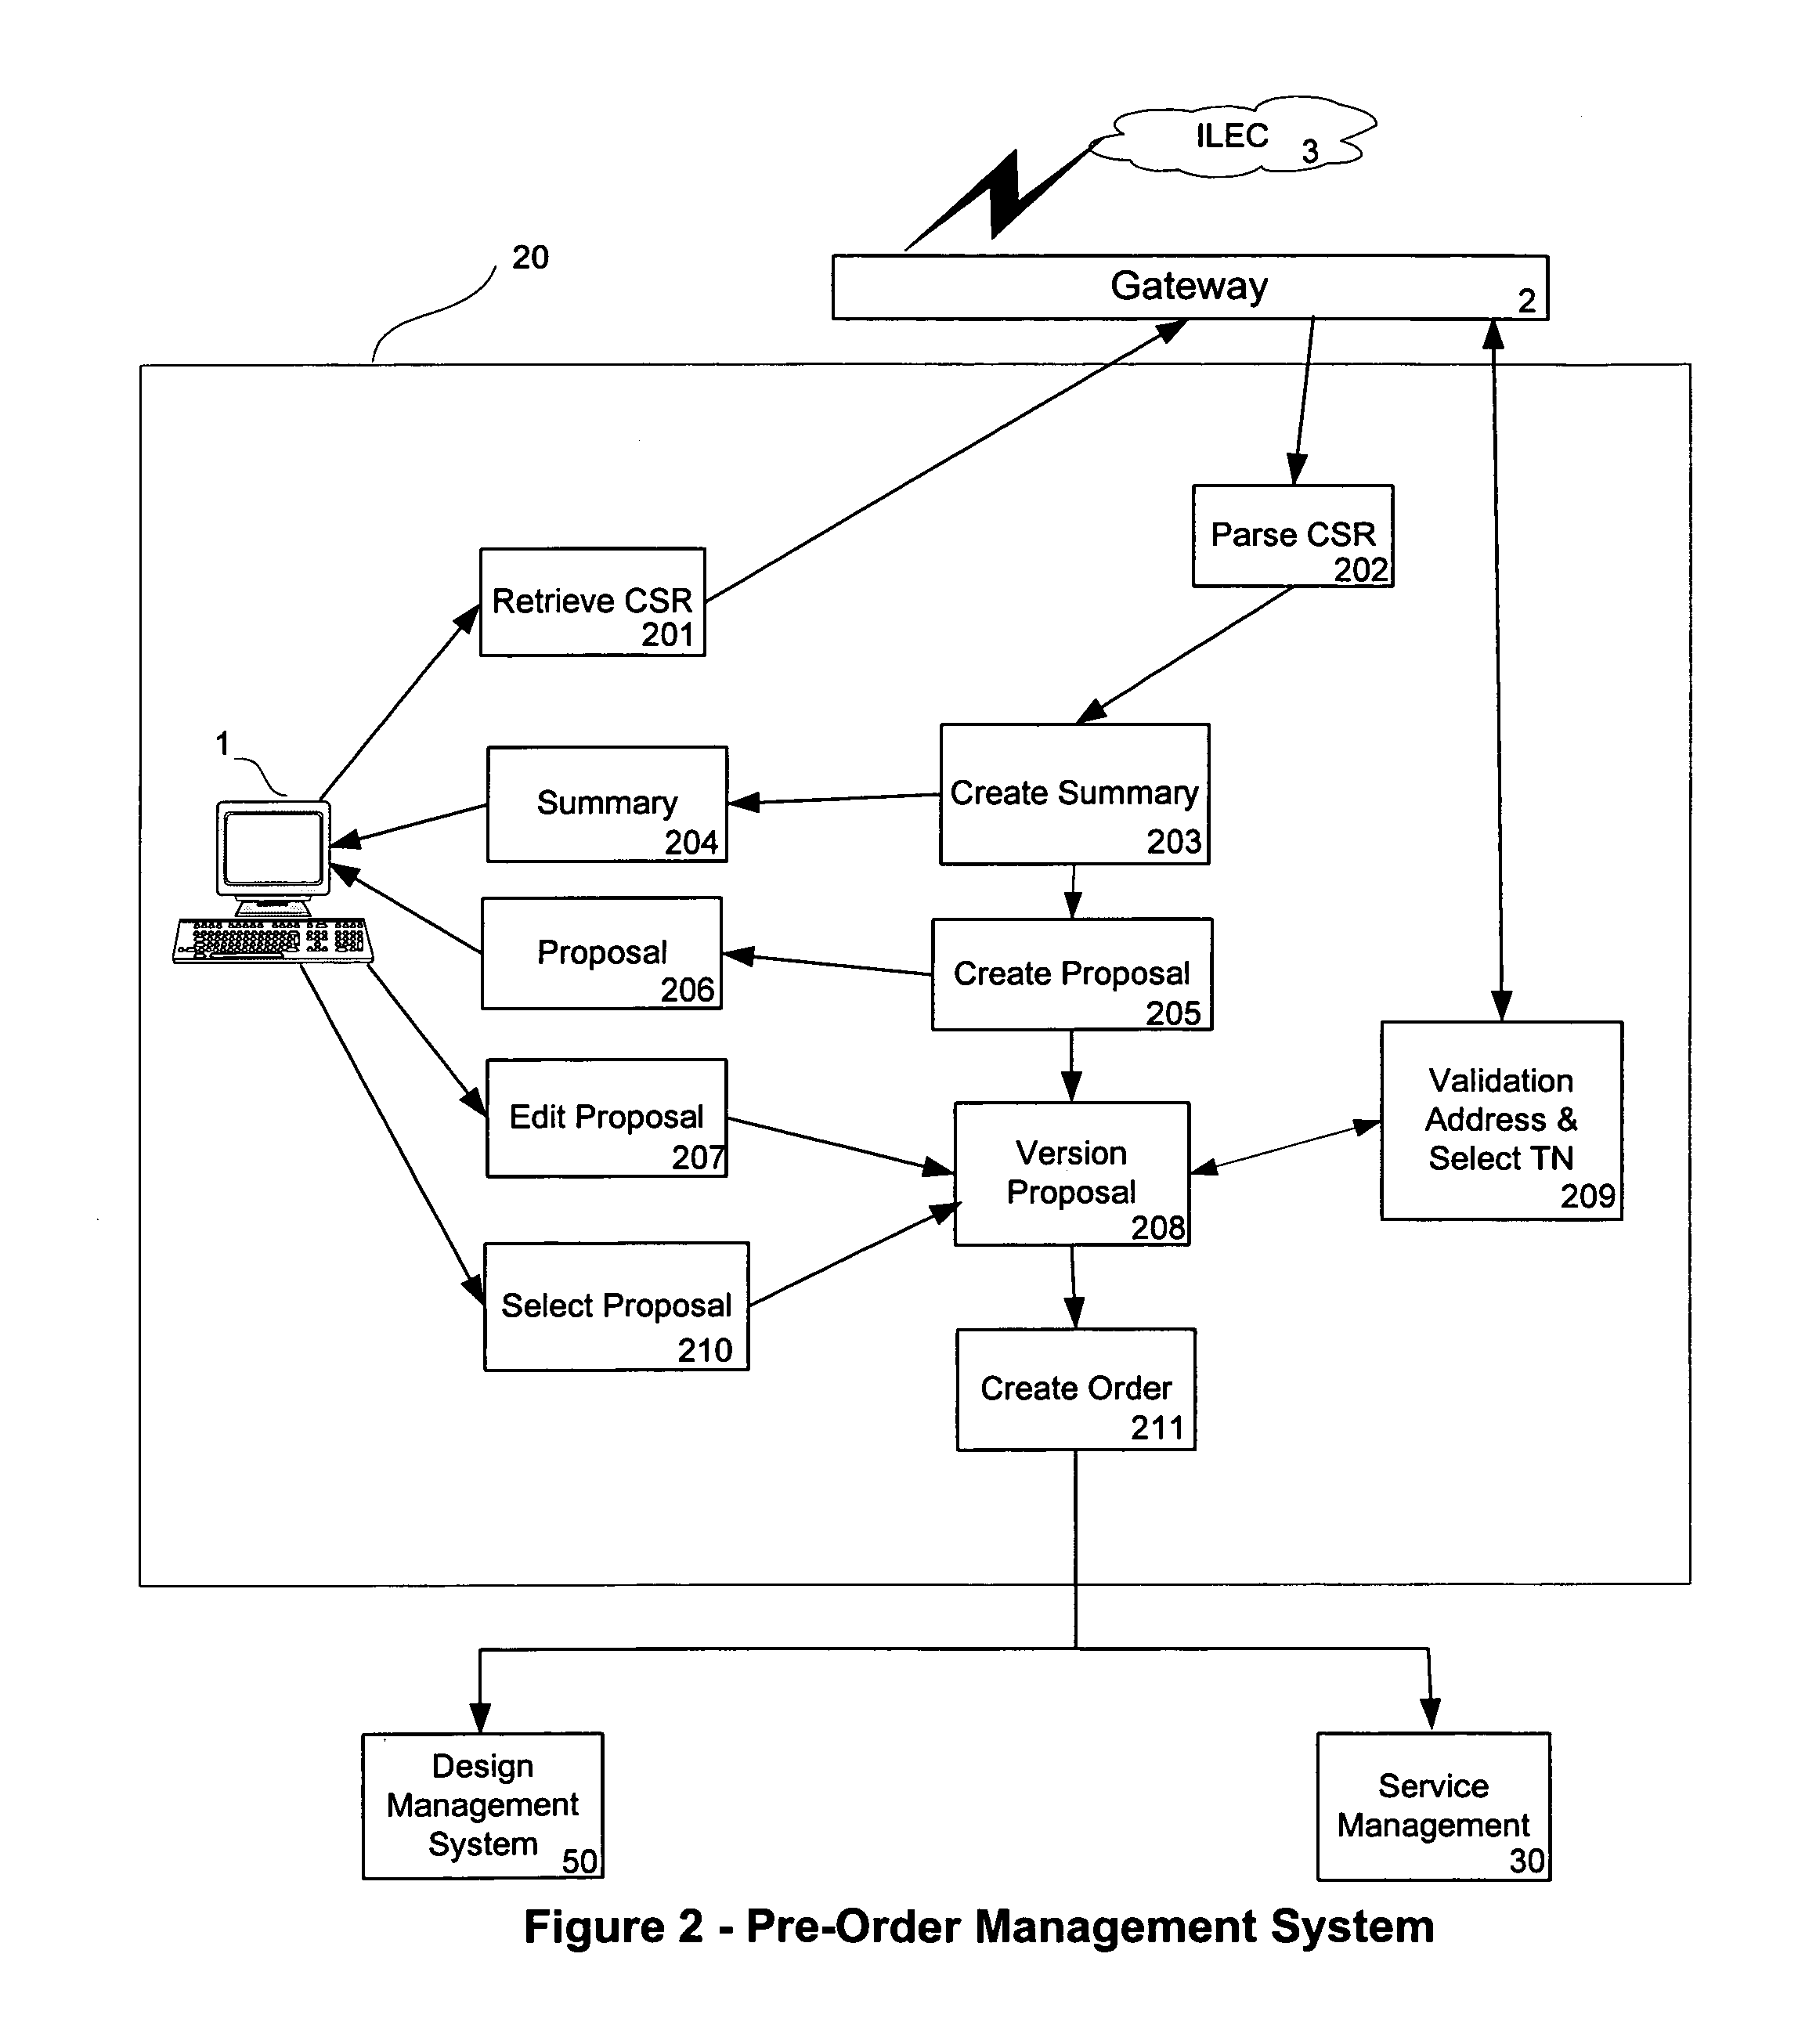 Fully integrated service manager with automatic flow-through interconnection